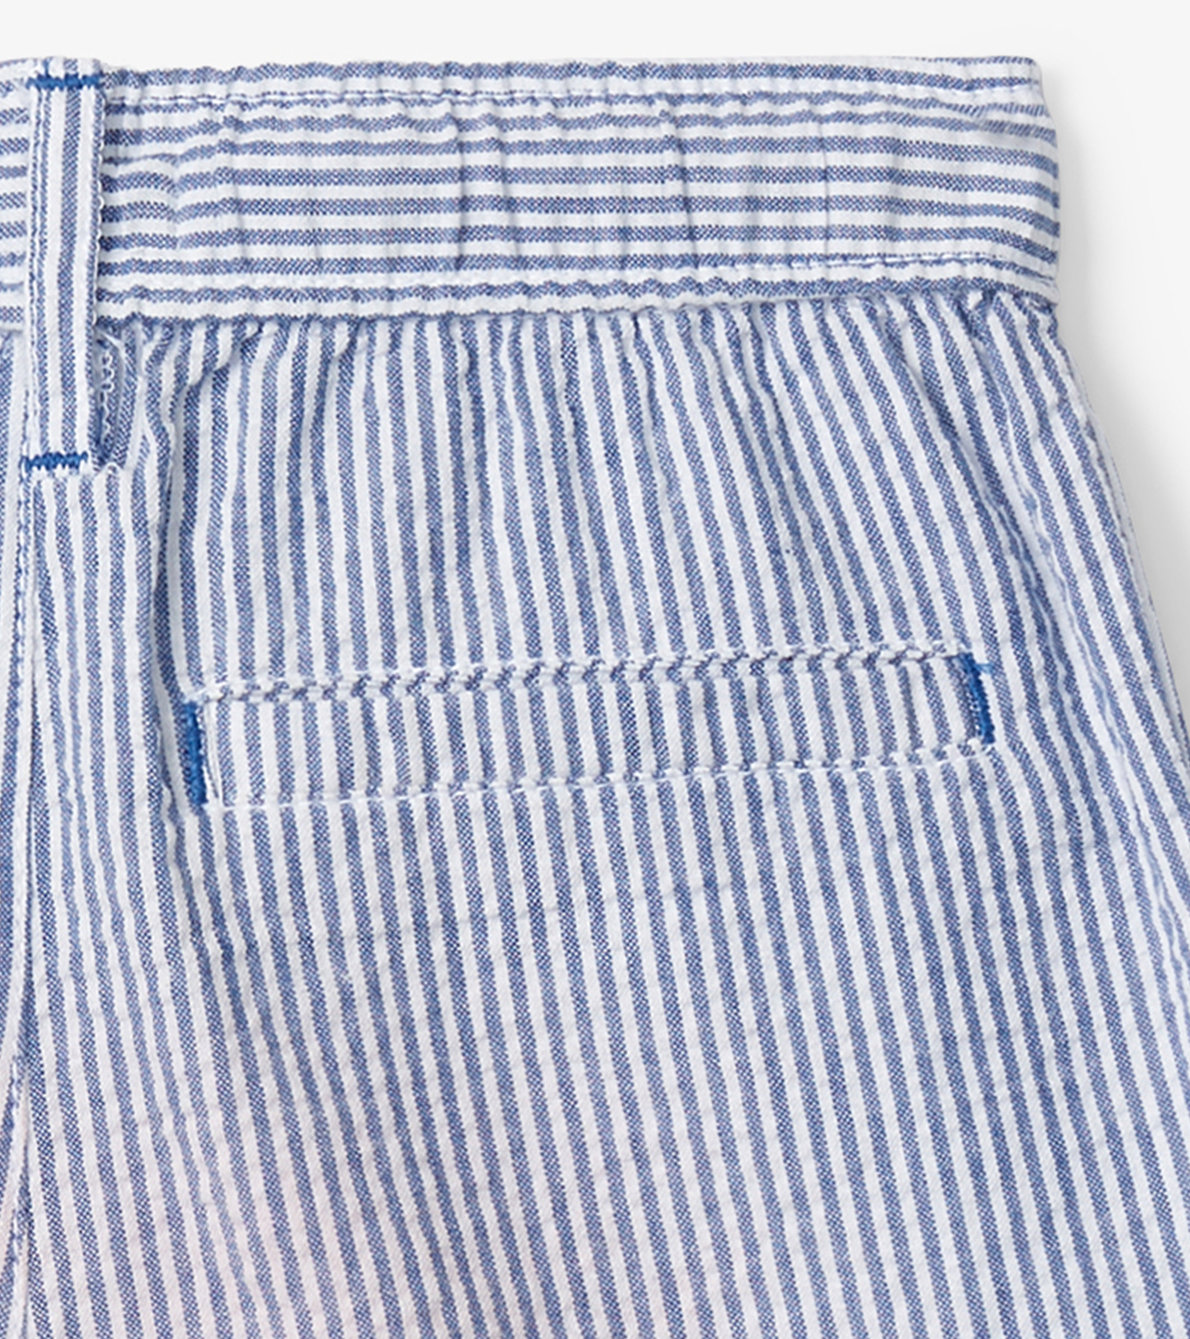 View larger image of Boys Blue Stripes Woven Shorts